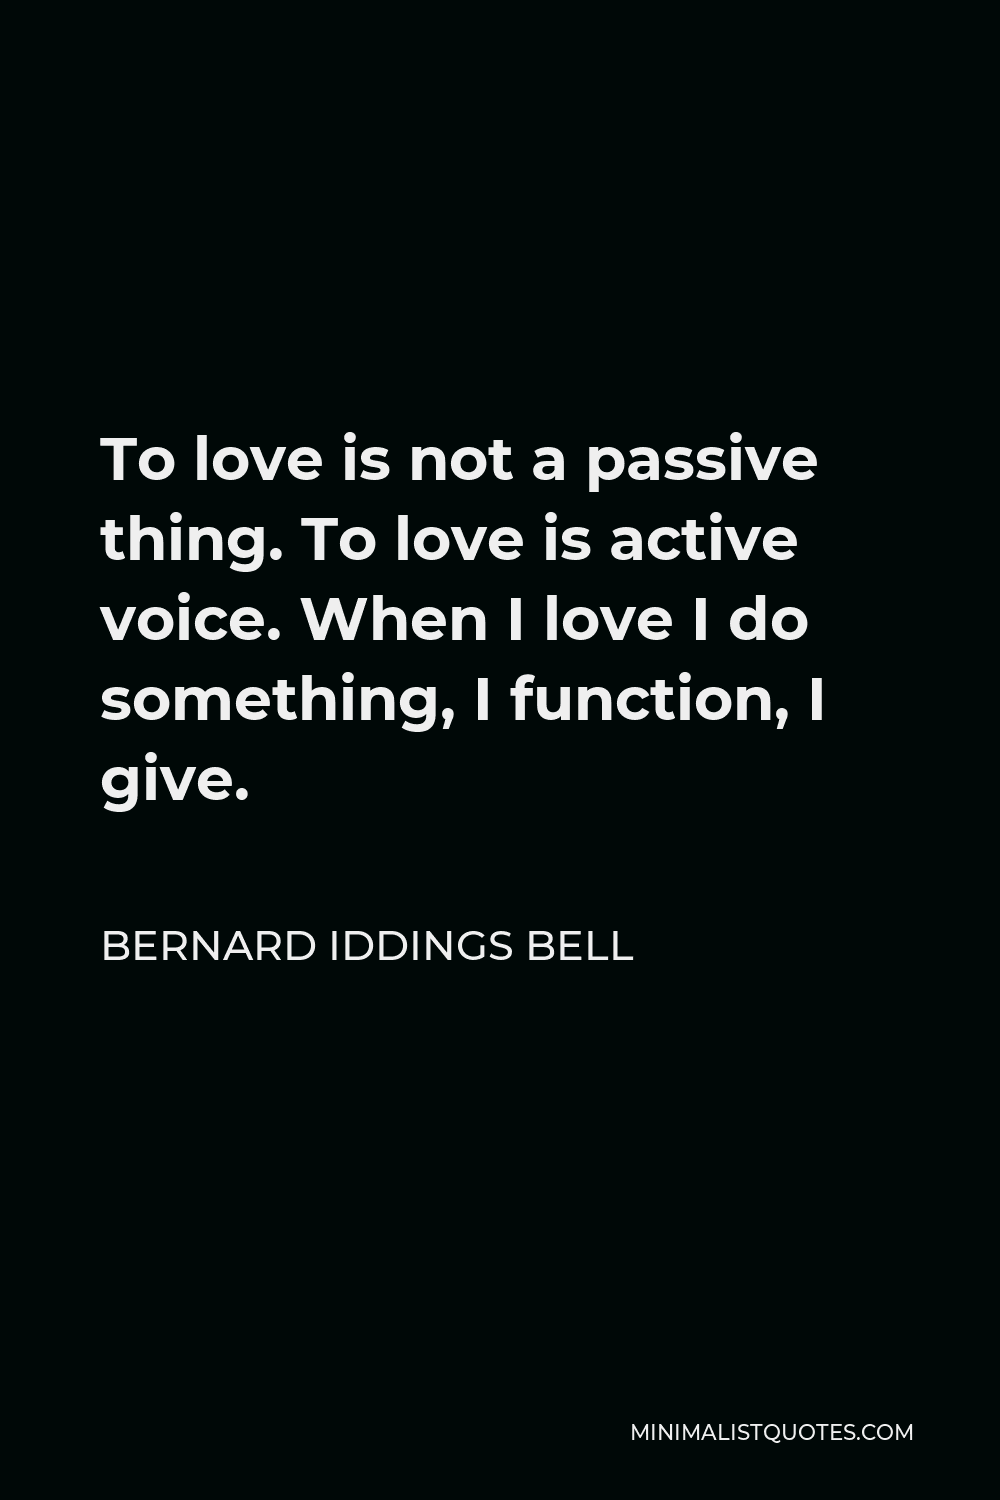 Bernard Iddings Bell Quote - To love is not a passive thing. To love is active voice. When I love I do something, I function, I give.